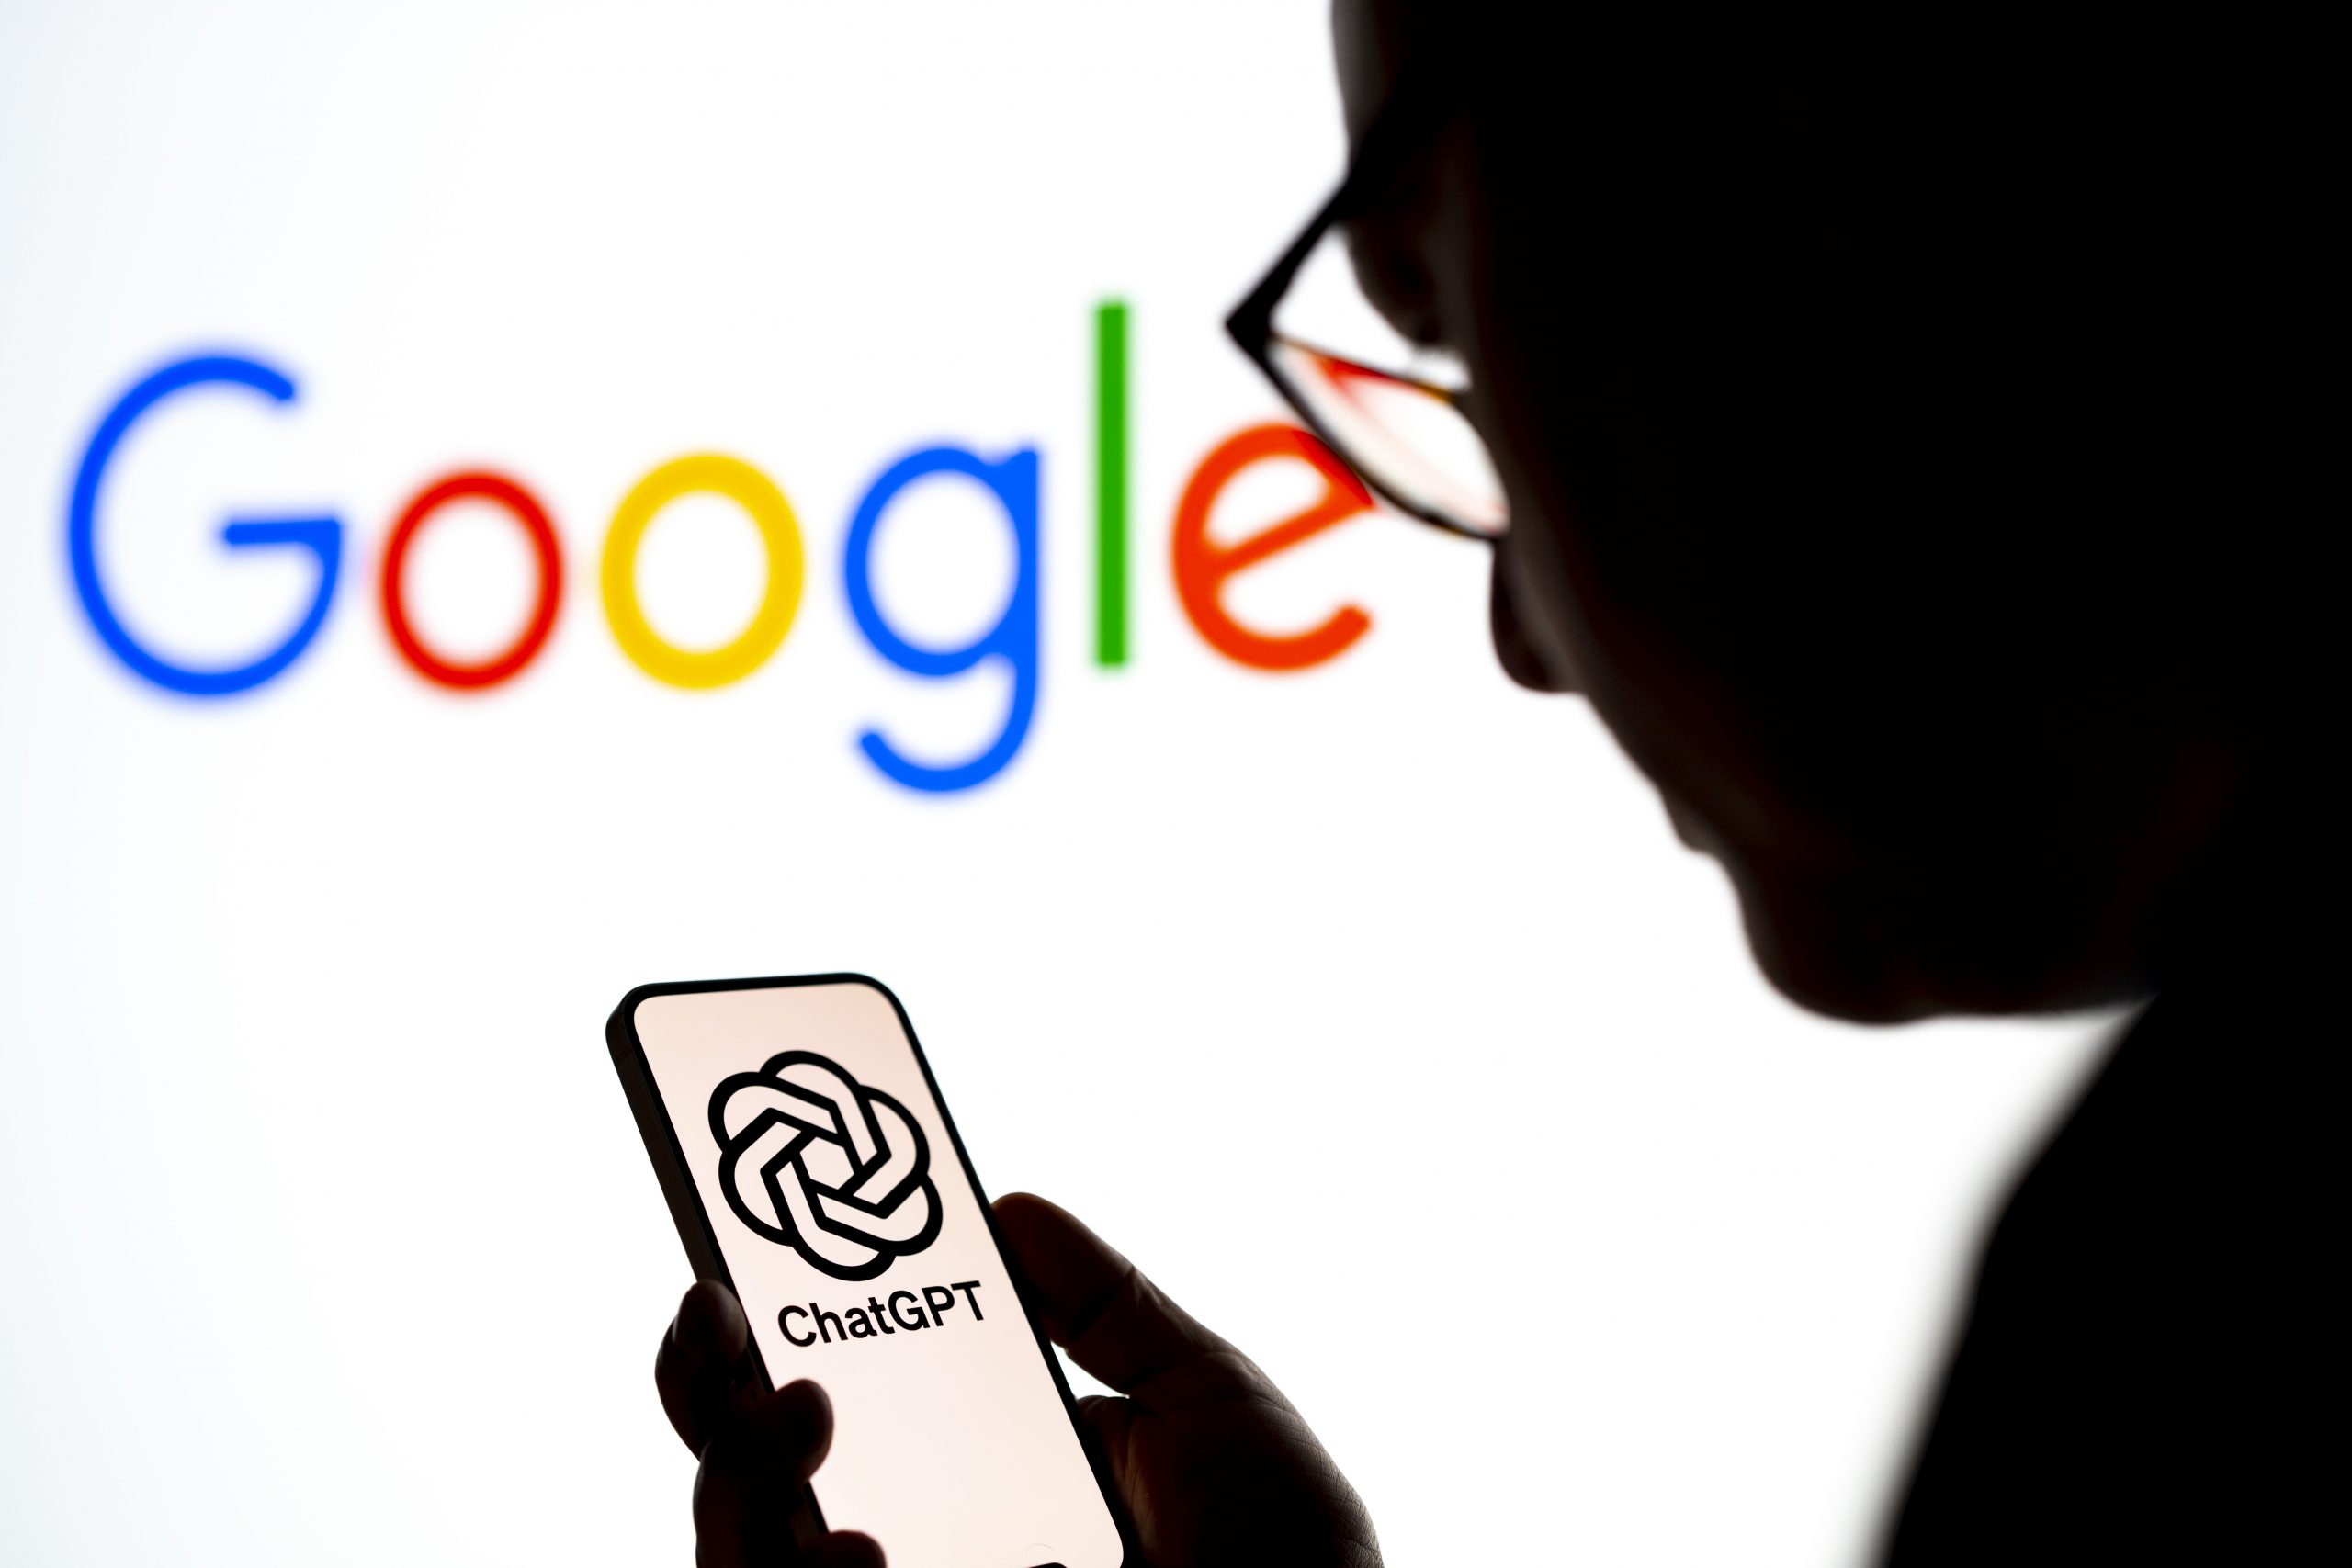 User looking at OpenAI ChatGPT logo on smartphone with Google logo in the background